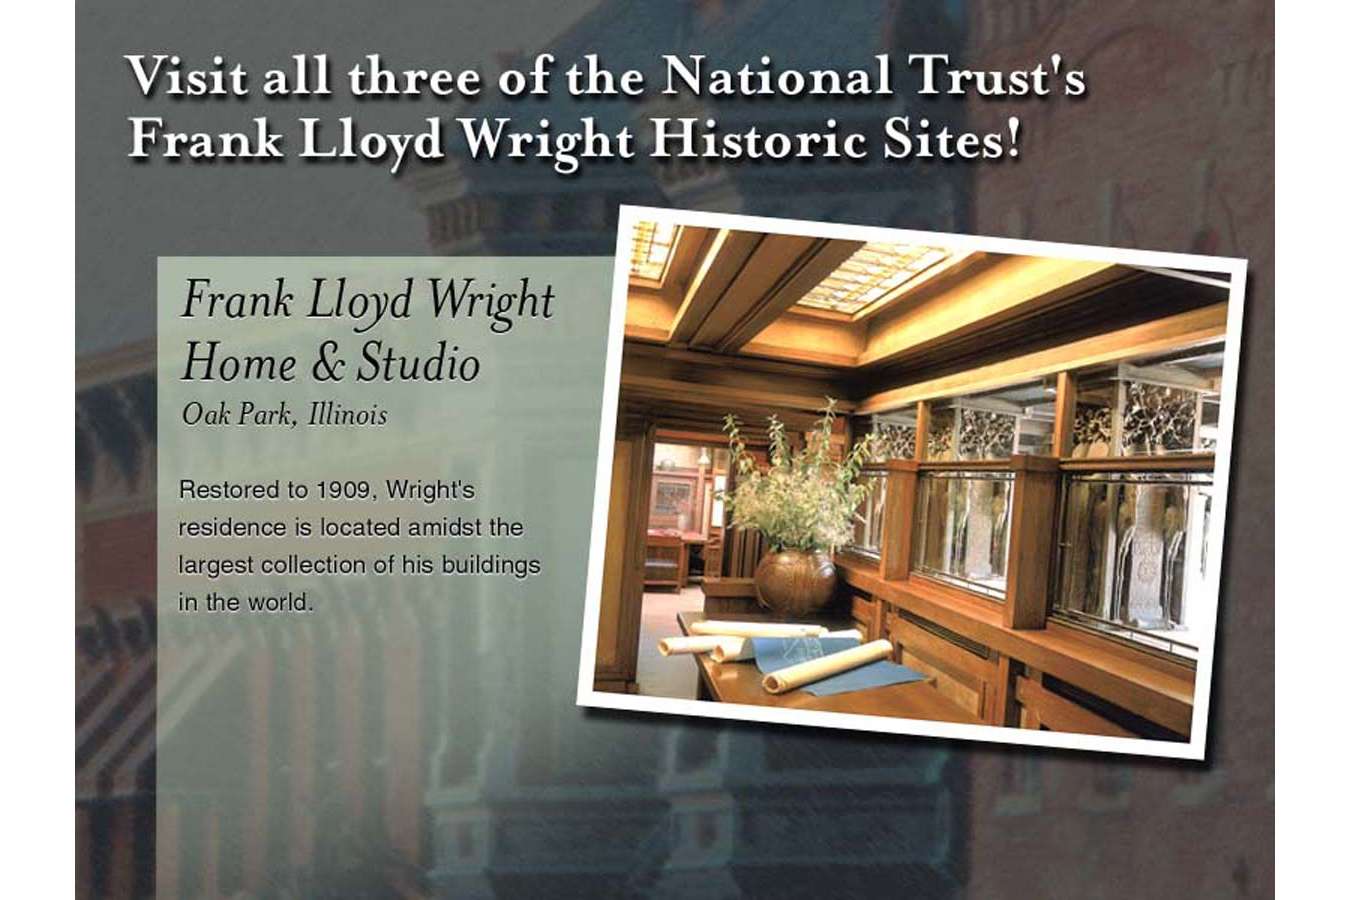 NTHP 3 web3 : For the Frank Lloyd Wright homes, customized articulated wood frame plaque was created